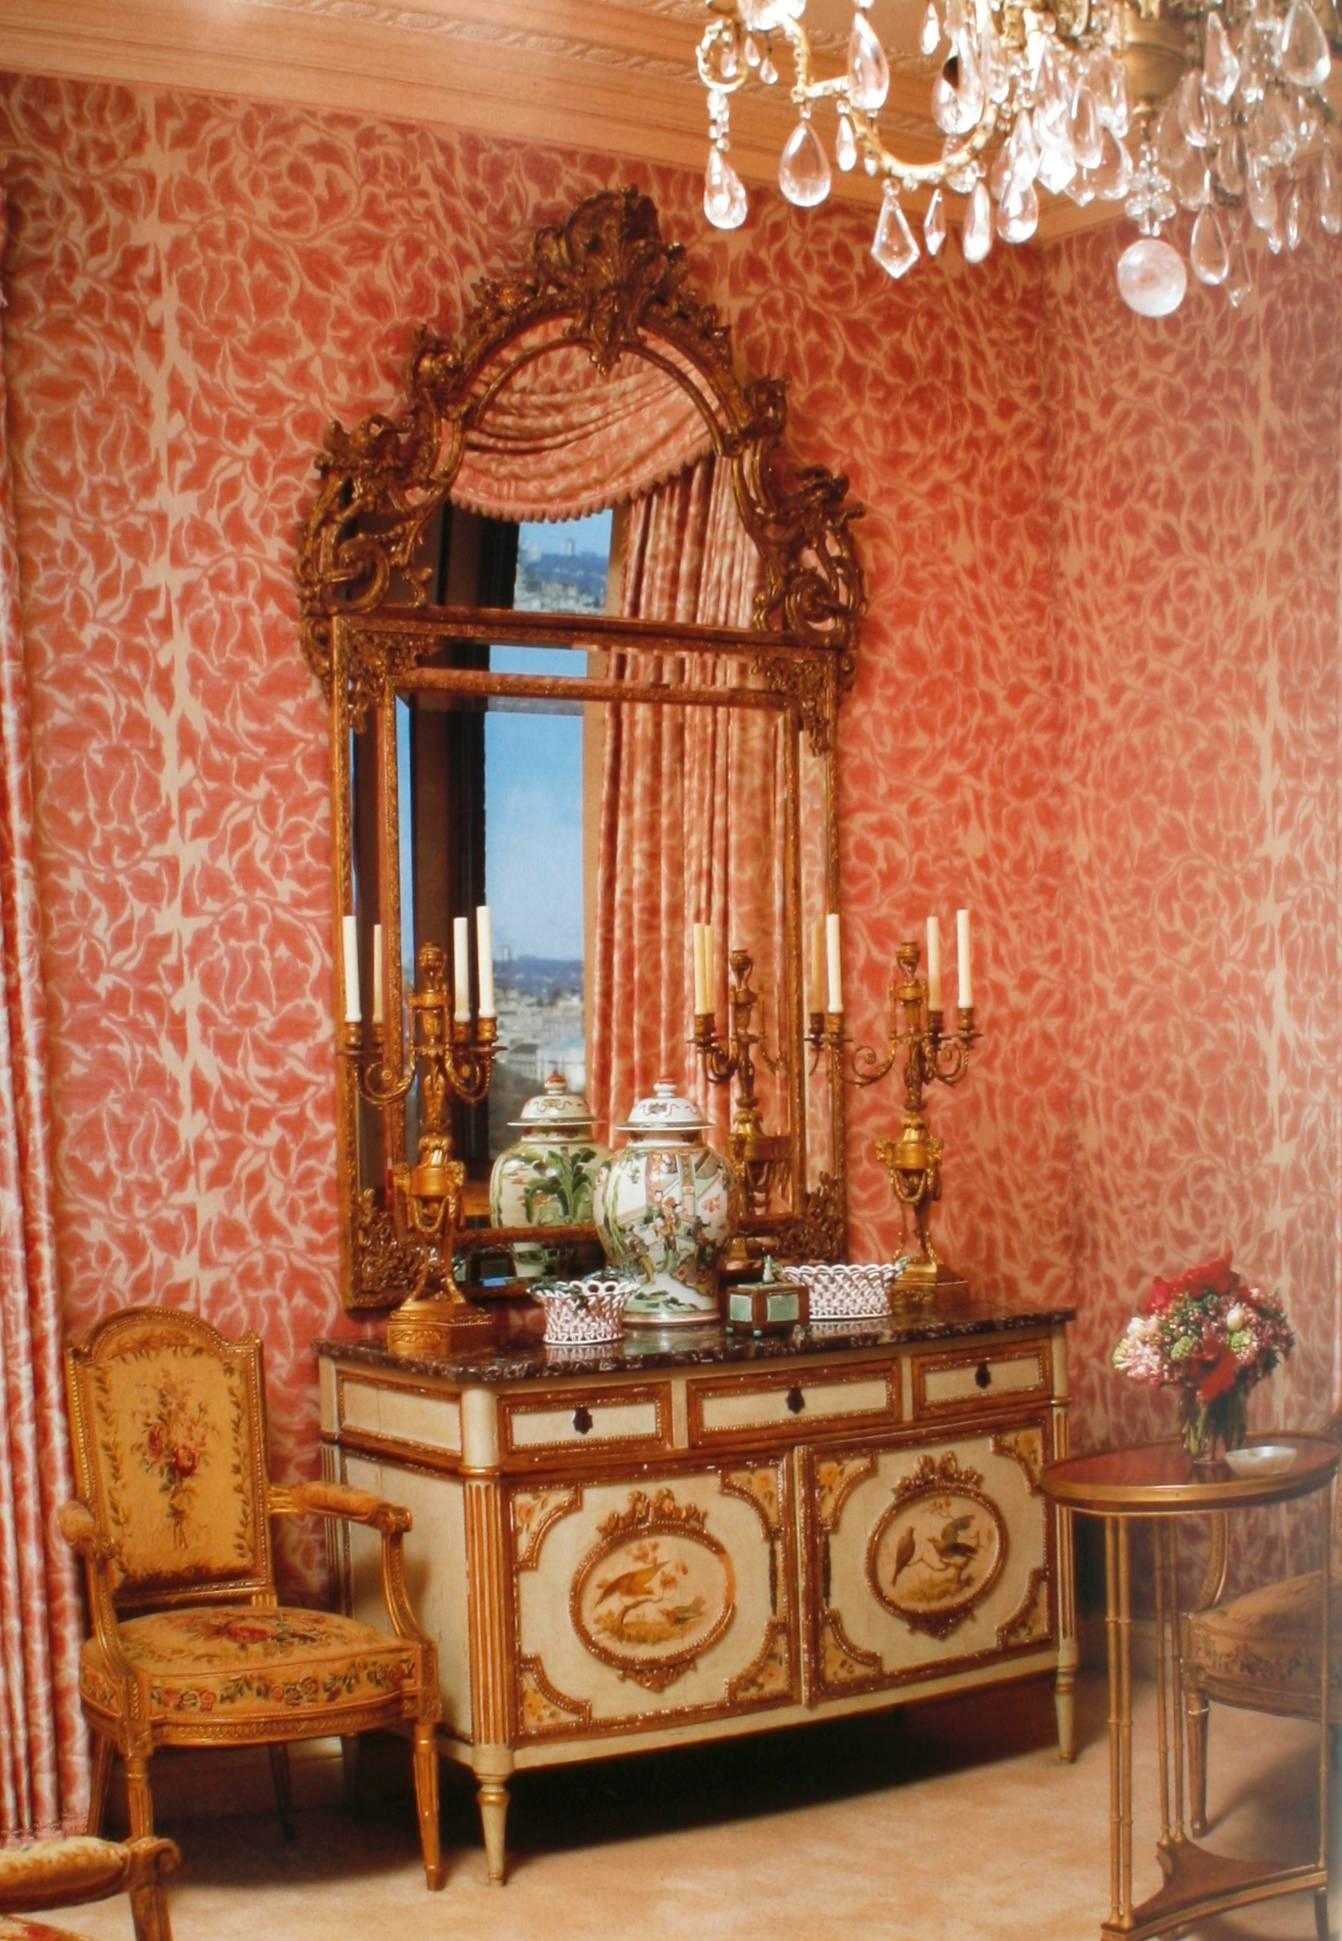 Sothebys May 1996 property from The Estate of Lita Annenberg Hazen. Softcover catalogue. Sotheby's sale of paintings, European furniture and decorative objects belonging to Lita Annenberg Hazen, who was a patron of scientific research and the sister